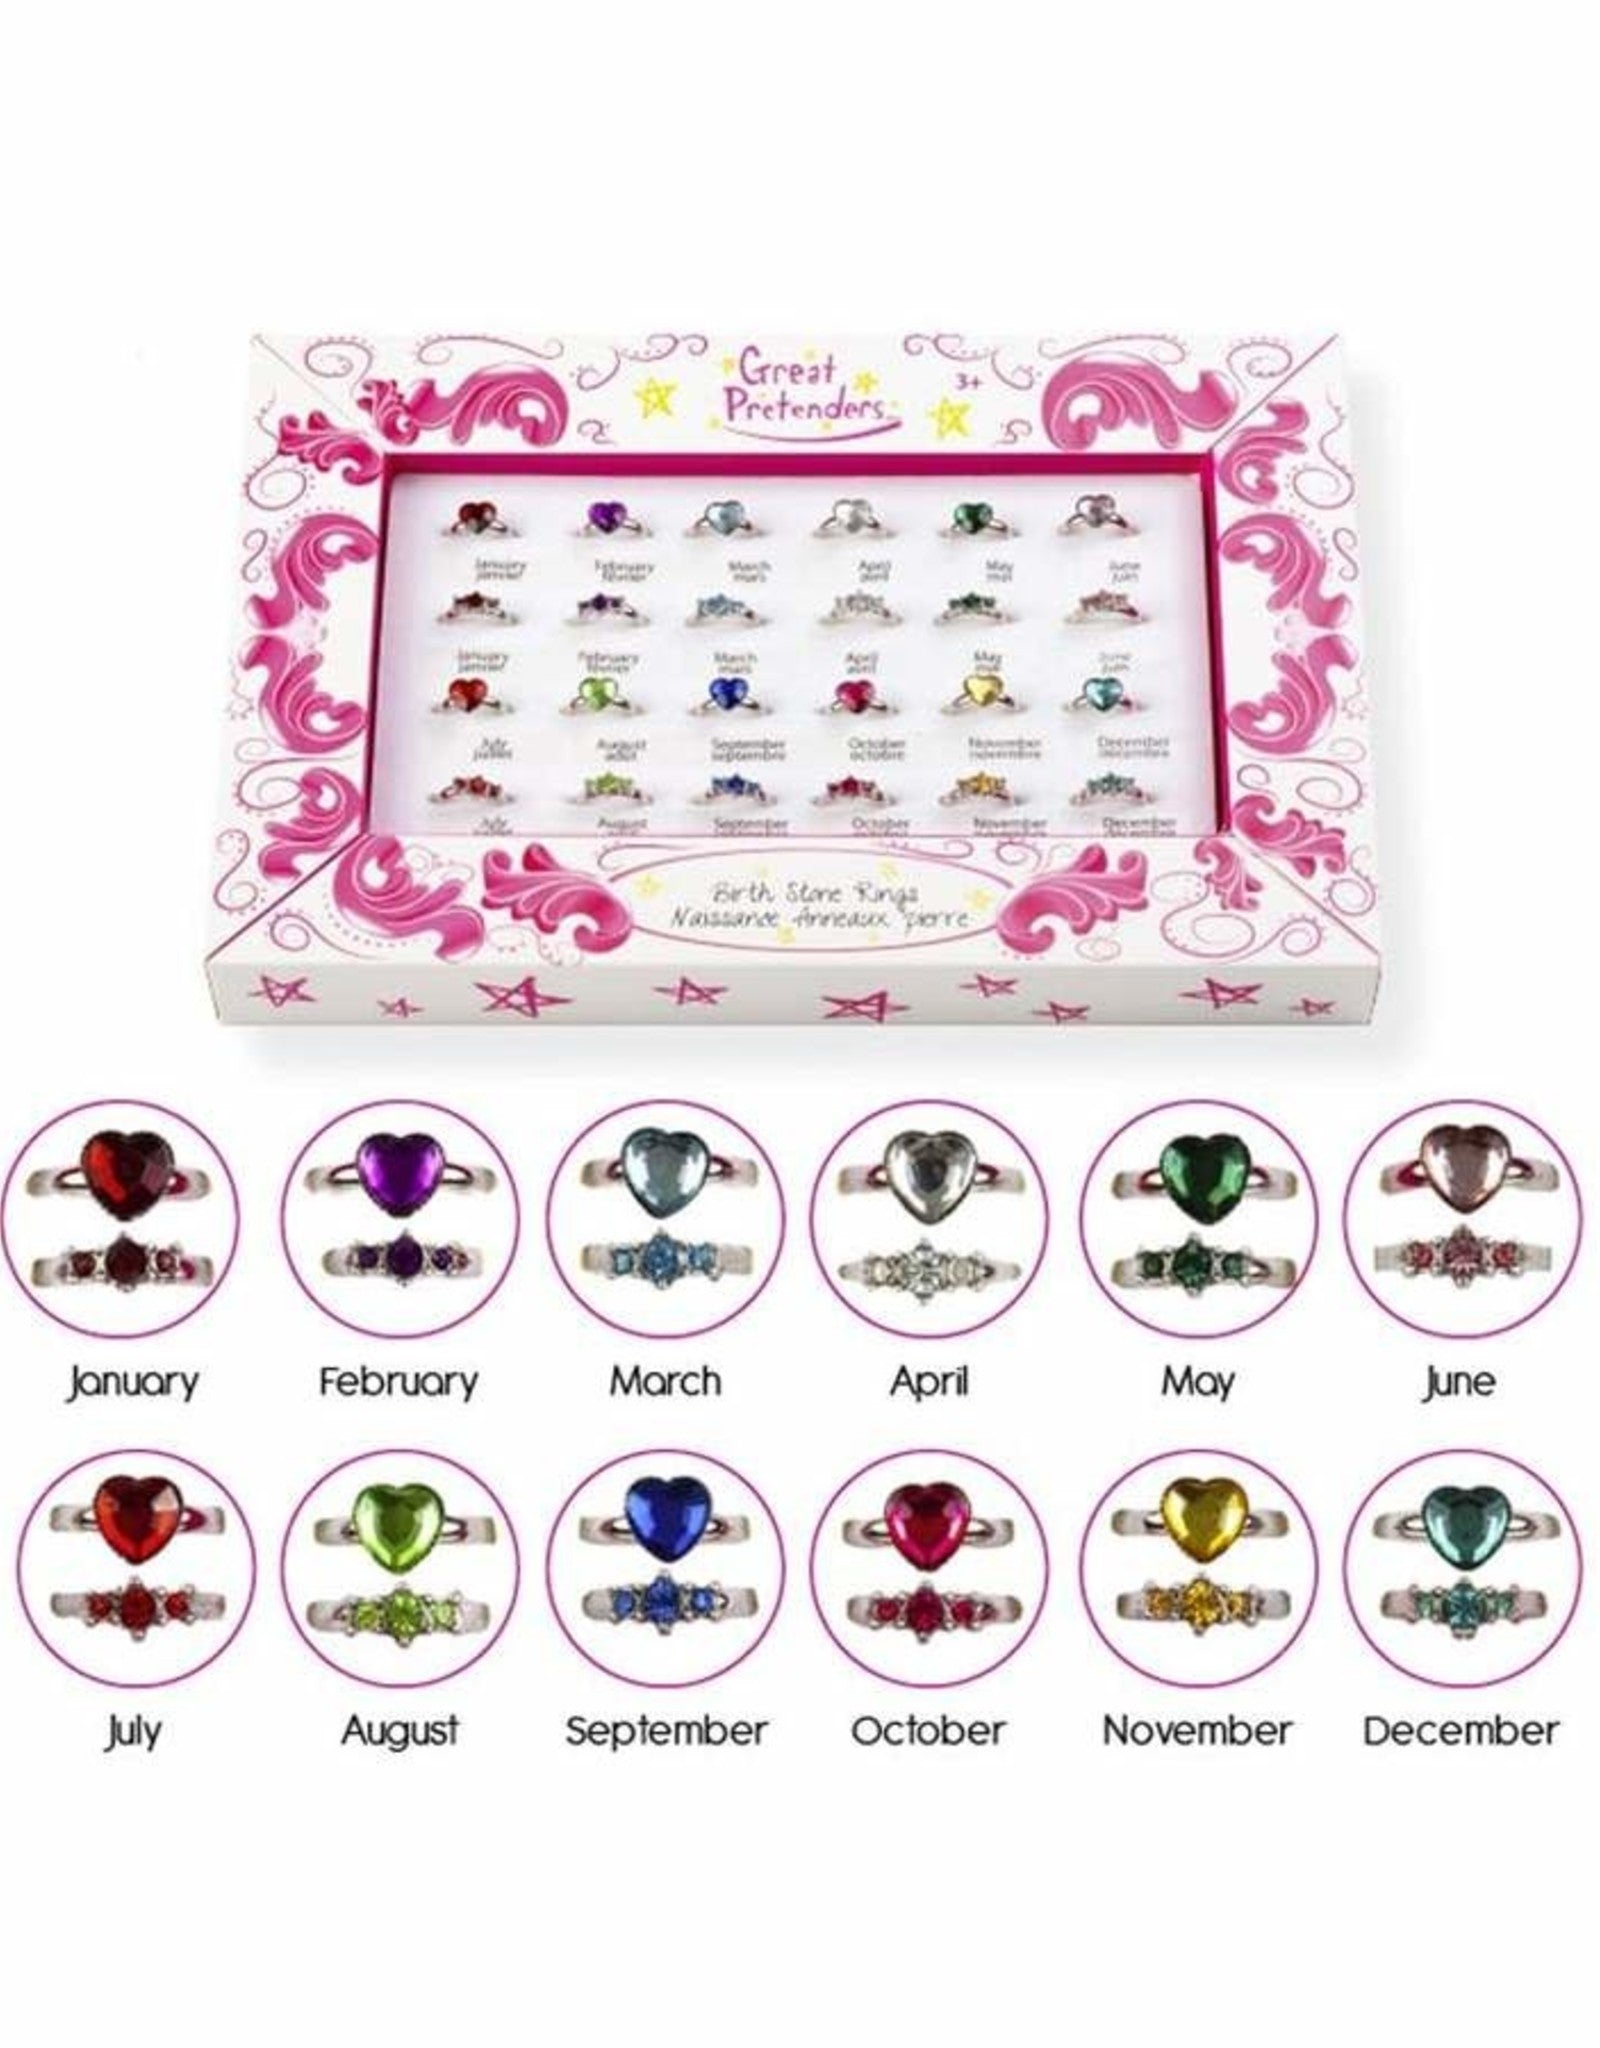 Birthstone Rings - Ages 3+